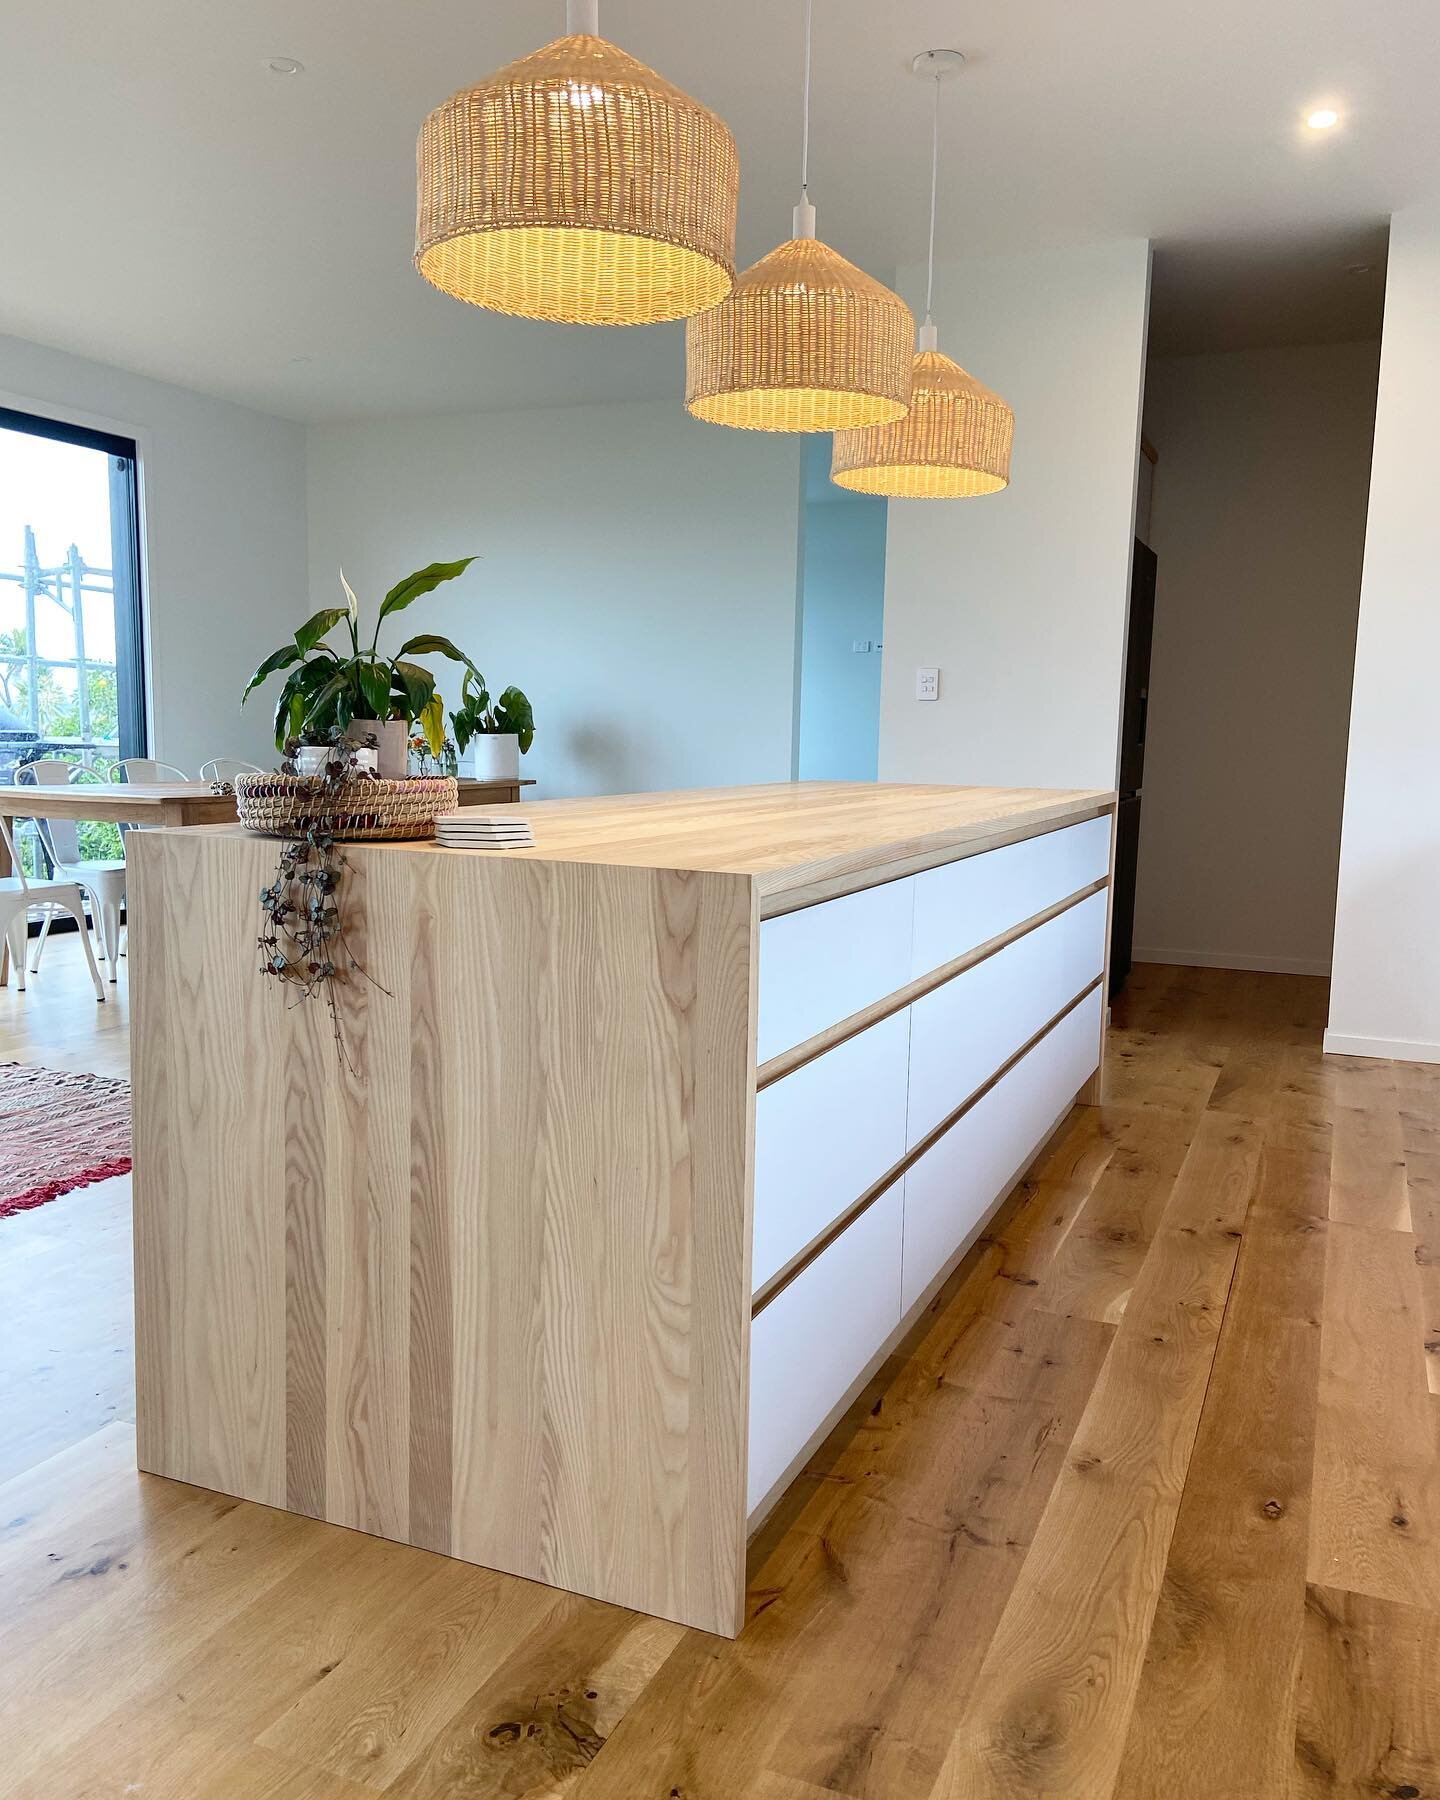 *Waterfall benchtop*
Solid Ash benchtop framing these draws. Featuring this unique handless design in birch ply.. draws also in birch ply. 
..
..
..
..
..
..
#waterfallbenchtop #kitchendesign #solidash #birchplywood #woodworks #waikato #raglannz #rag